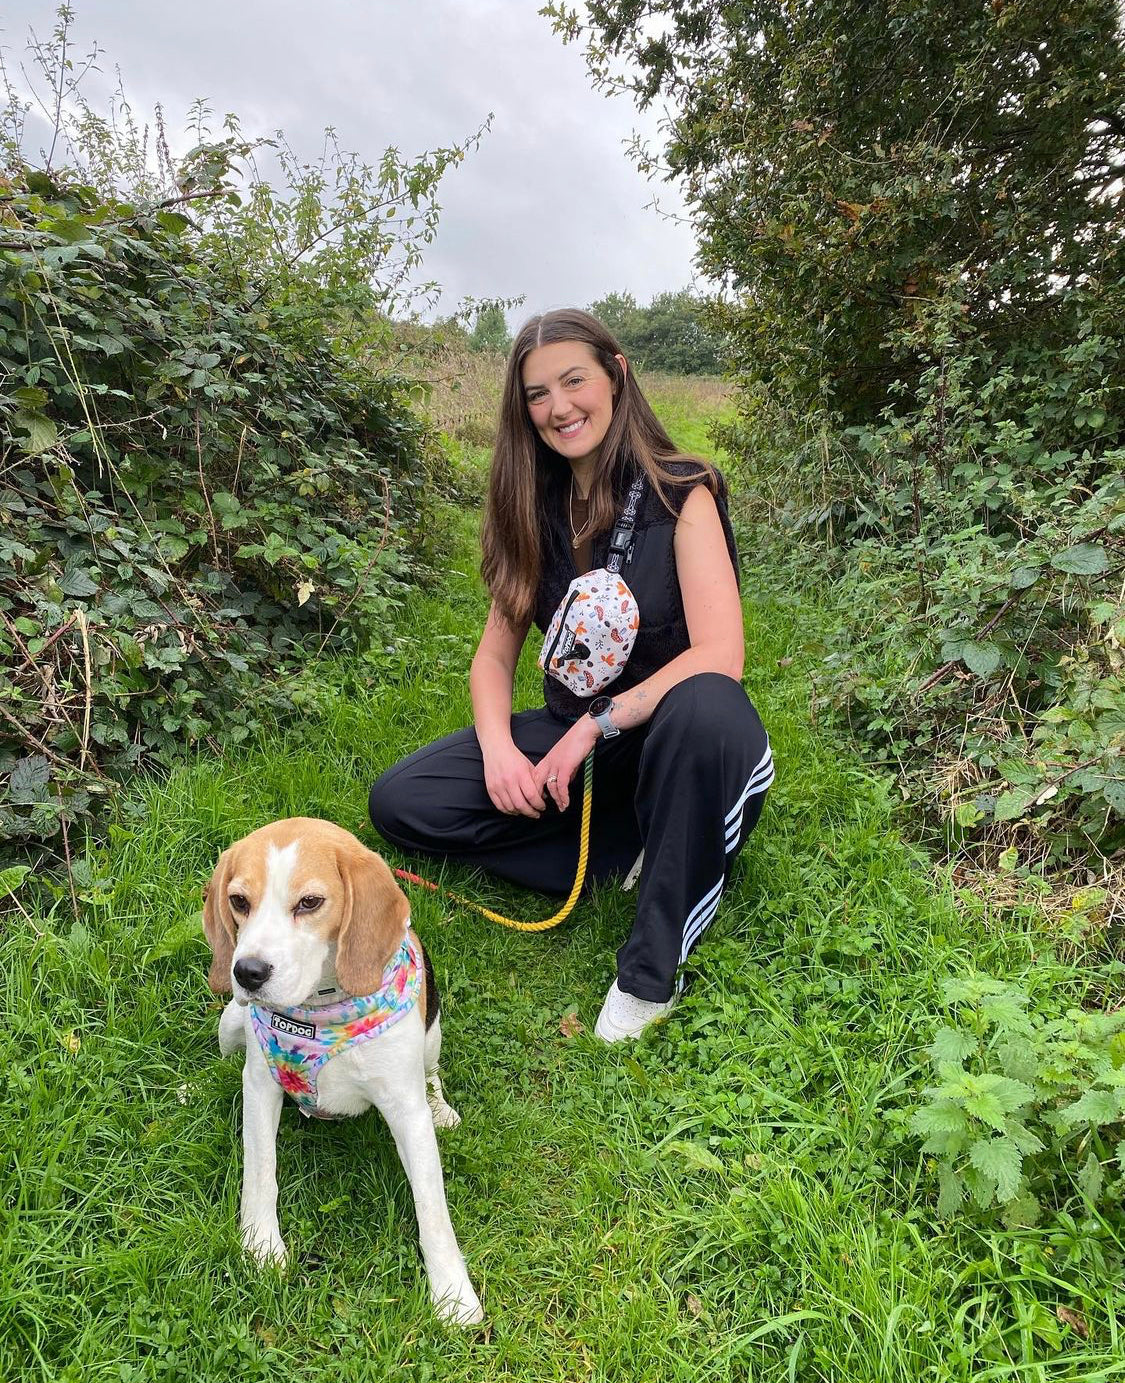 Beagle with young woman owner wearing topDog Harnesses Matching Essential Dog walking bag, sitting on grass on a country walk